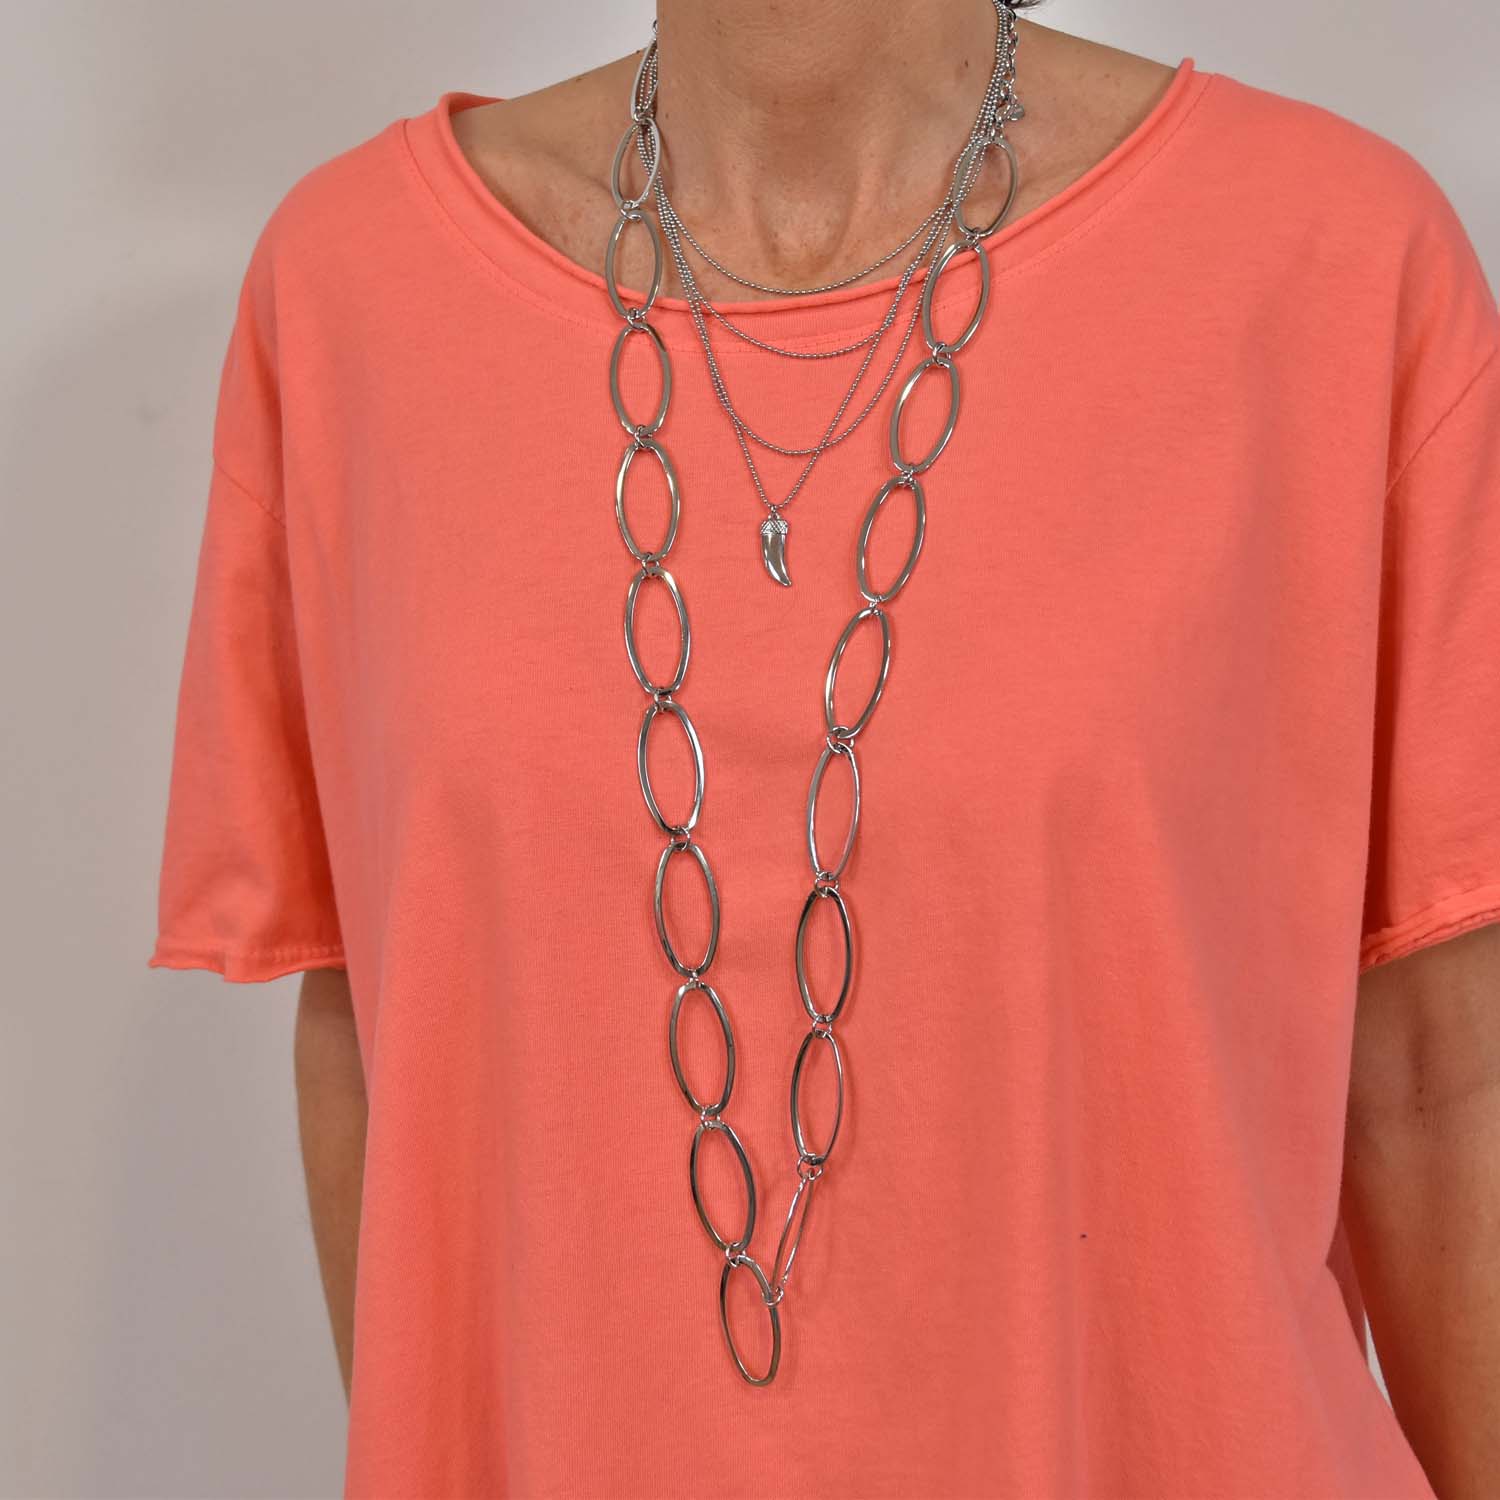 Oval long necklace
